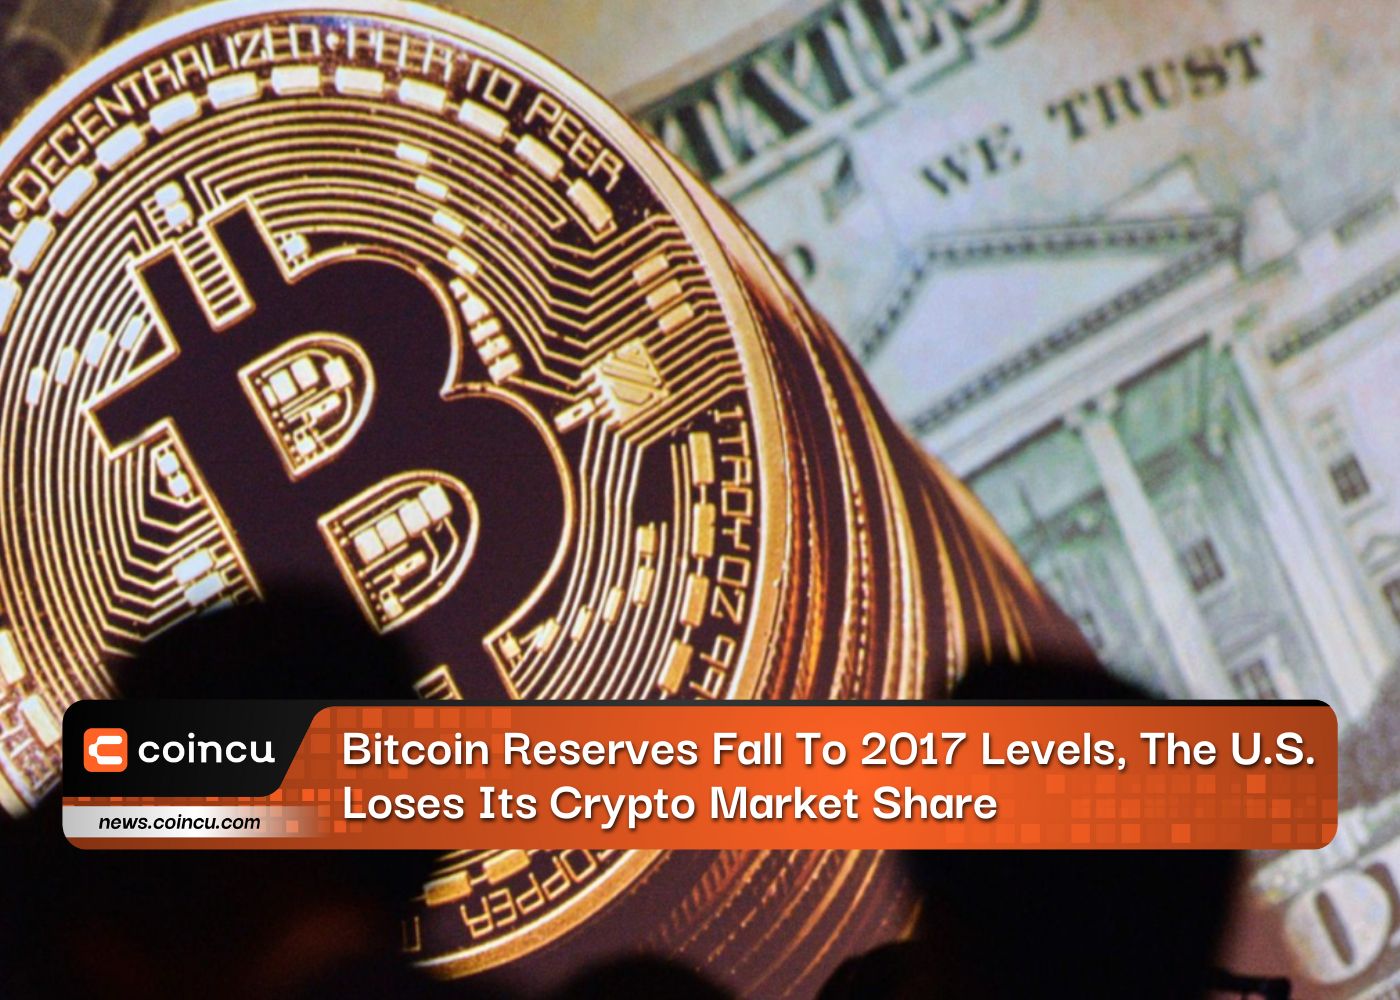 Bitcoin Reserves Fall To 2017 Levels, The U.S. Loses Its Crypto Market Share